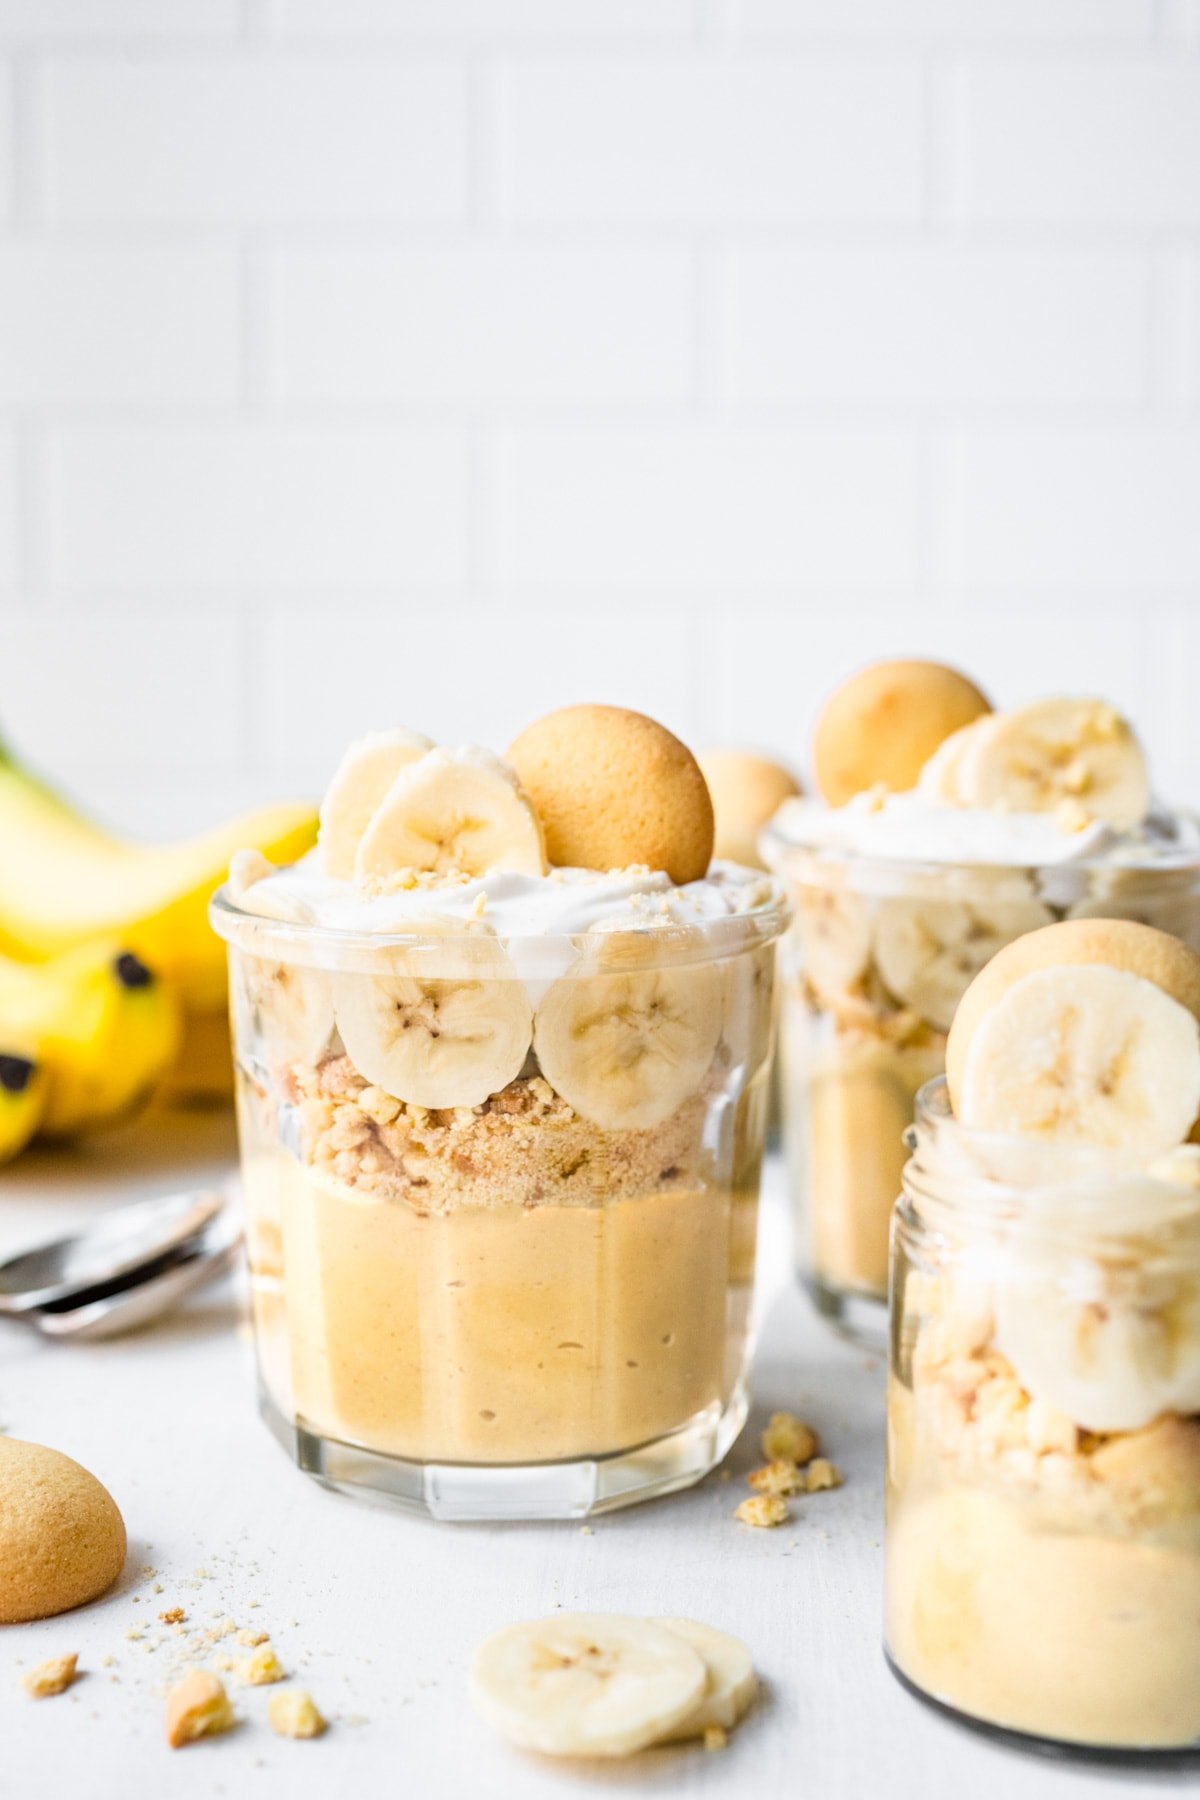 Front view of banana pudding in a small jar.